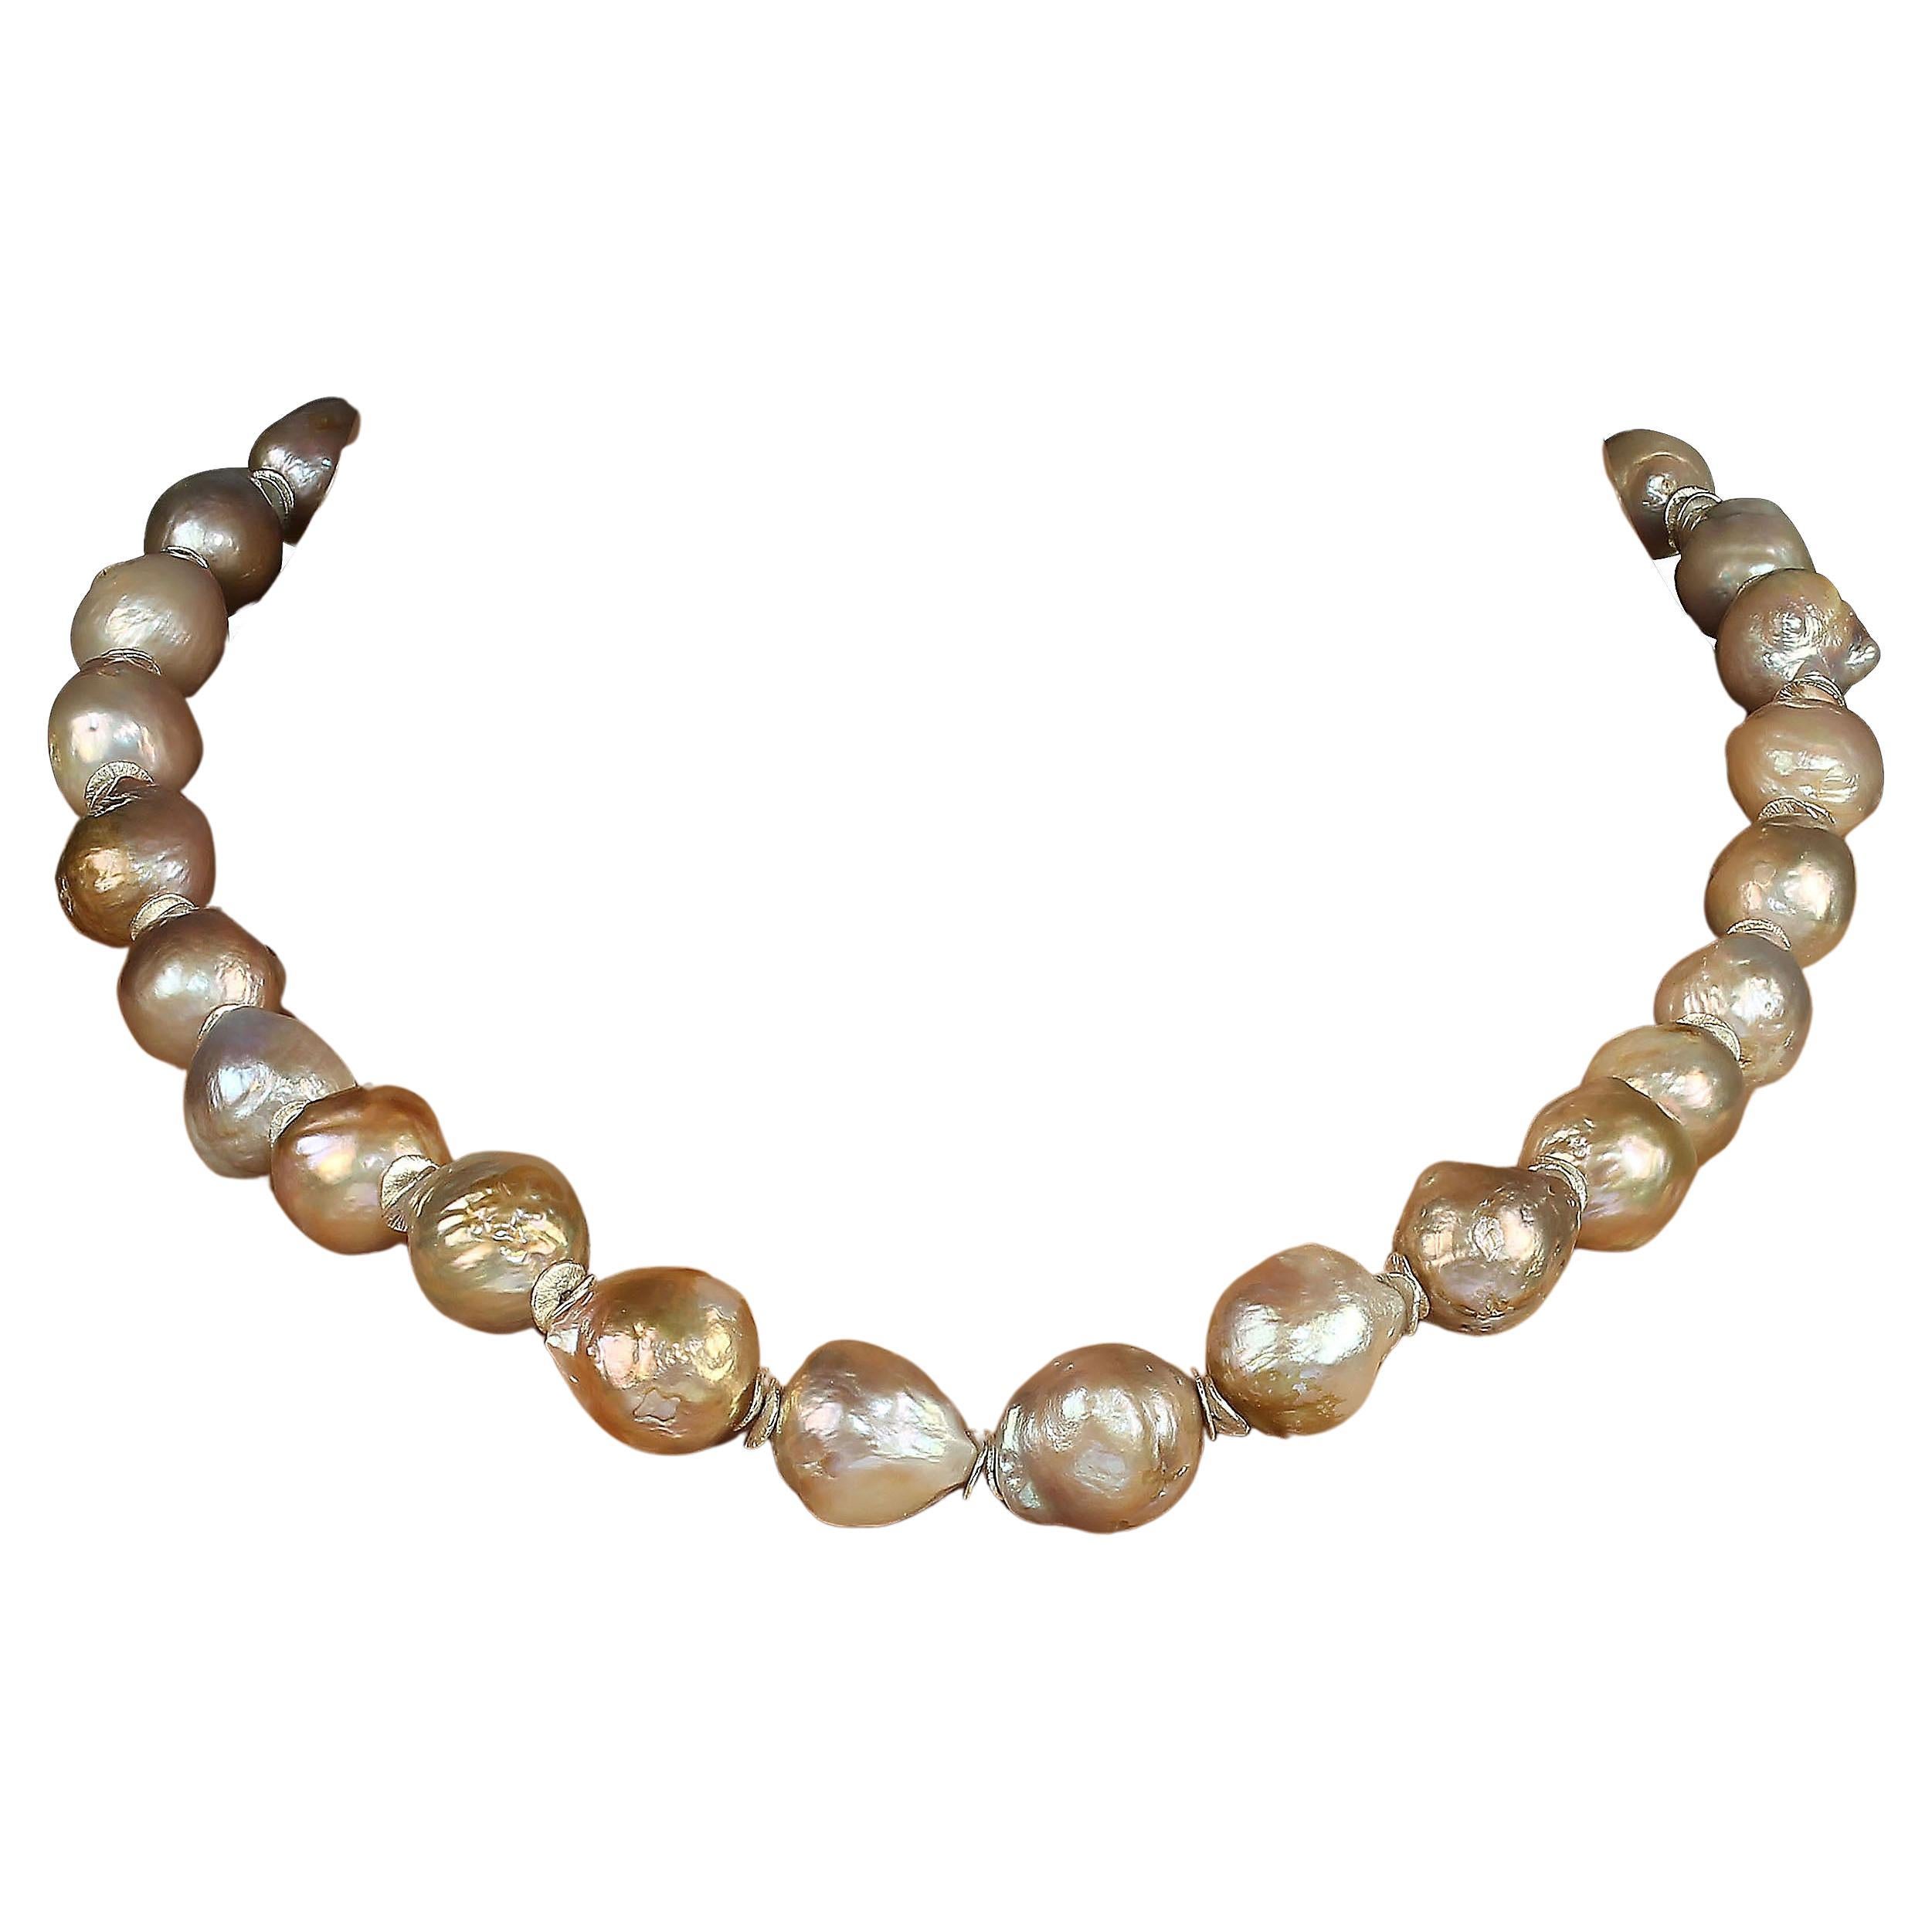 Artisan AJD 19 Inch Baroque Iridescent Silvery Pearls with silvery accents Perfect Gift! For Sale